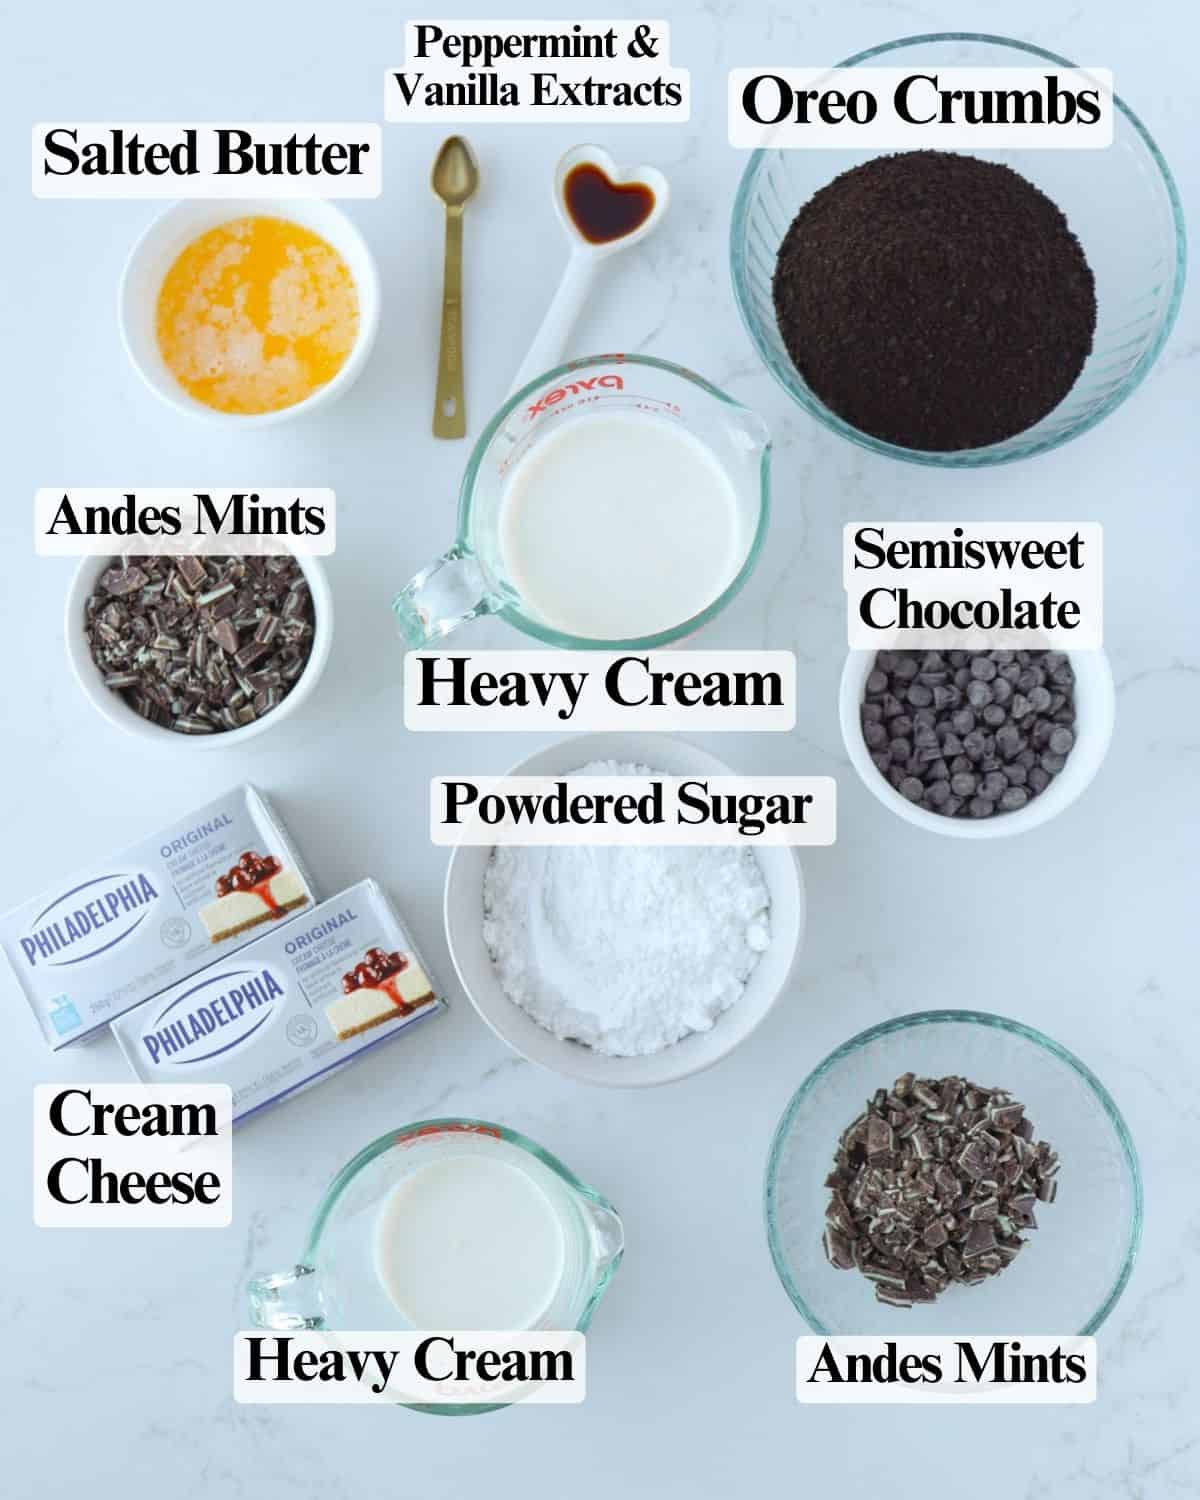 Ingredients for chocolate mint cheesecake: melted butter, Oreo crumbs, cream cheese, heavy cream, semisweet chocolate chips, chopped Andes mints, peppermint extract, vanilla, and powdered sugar.